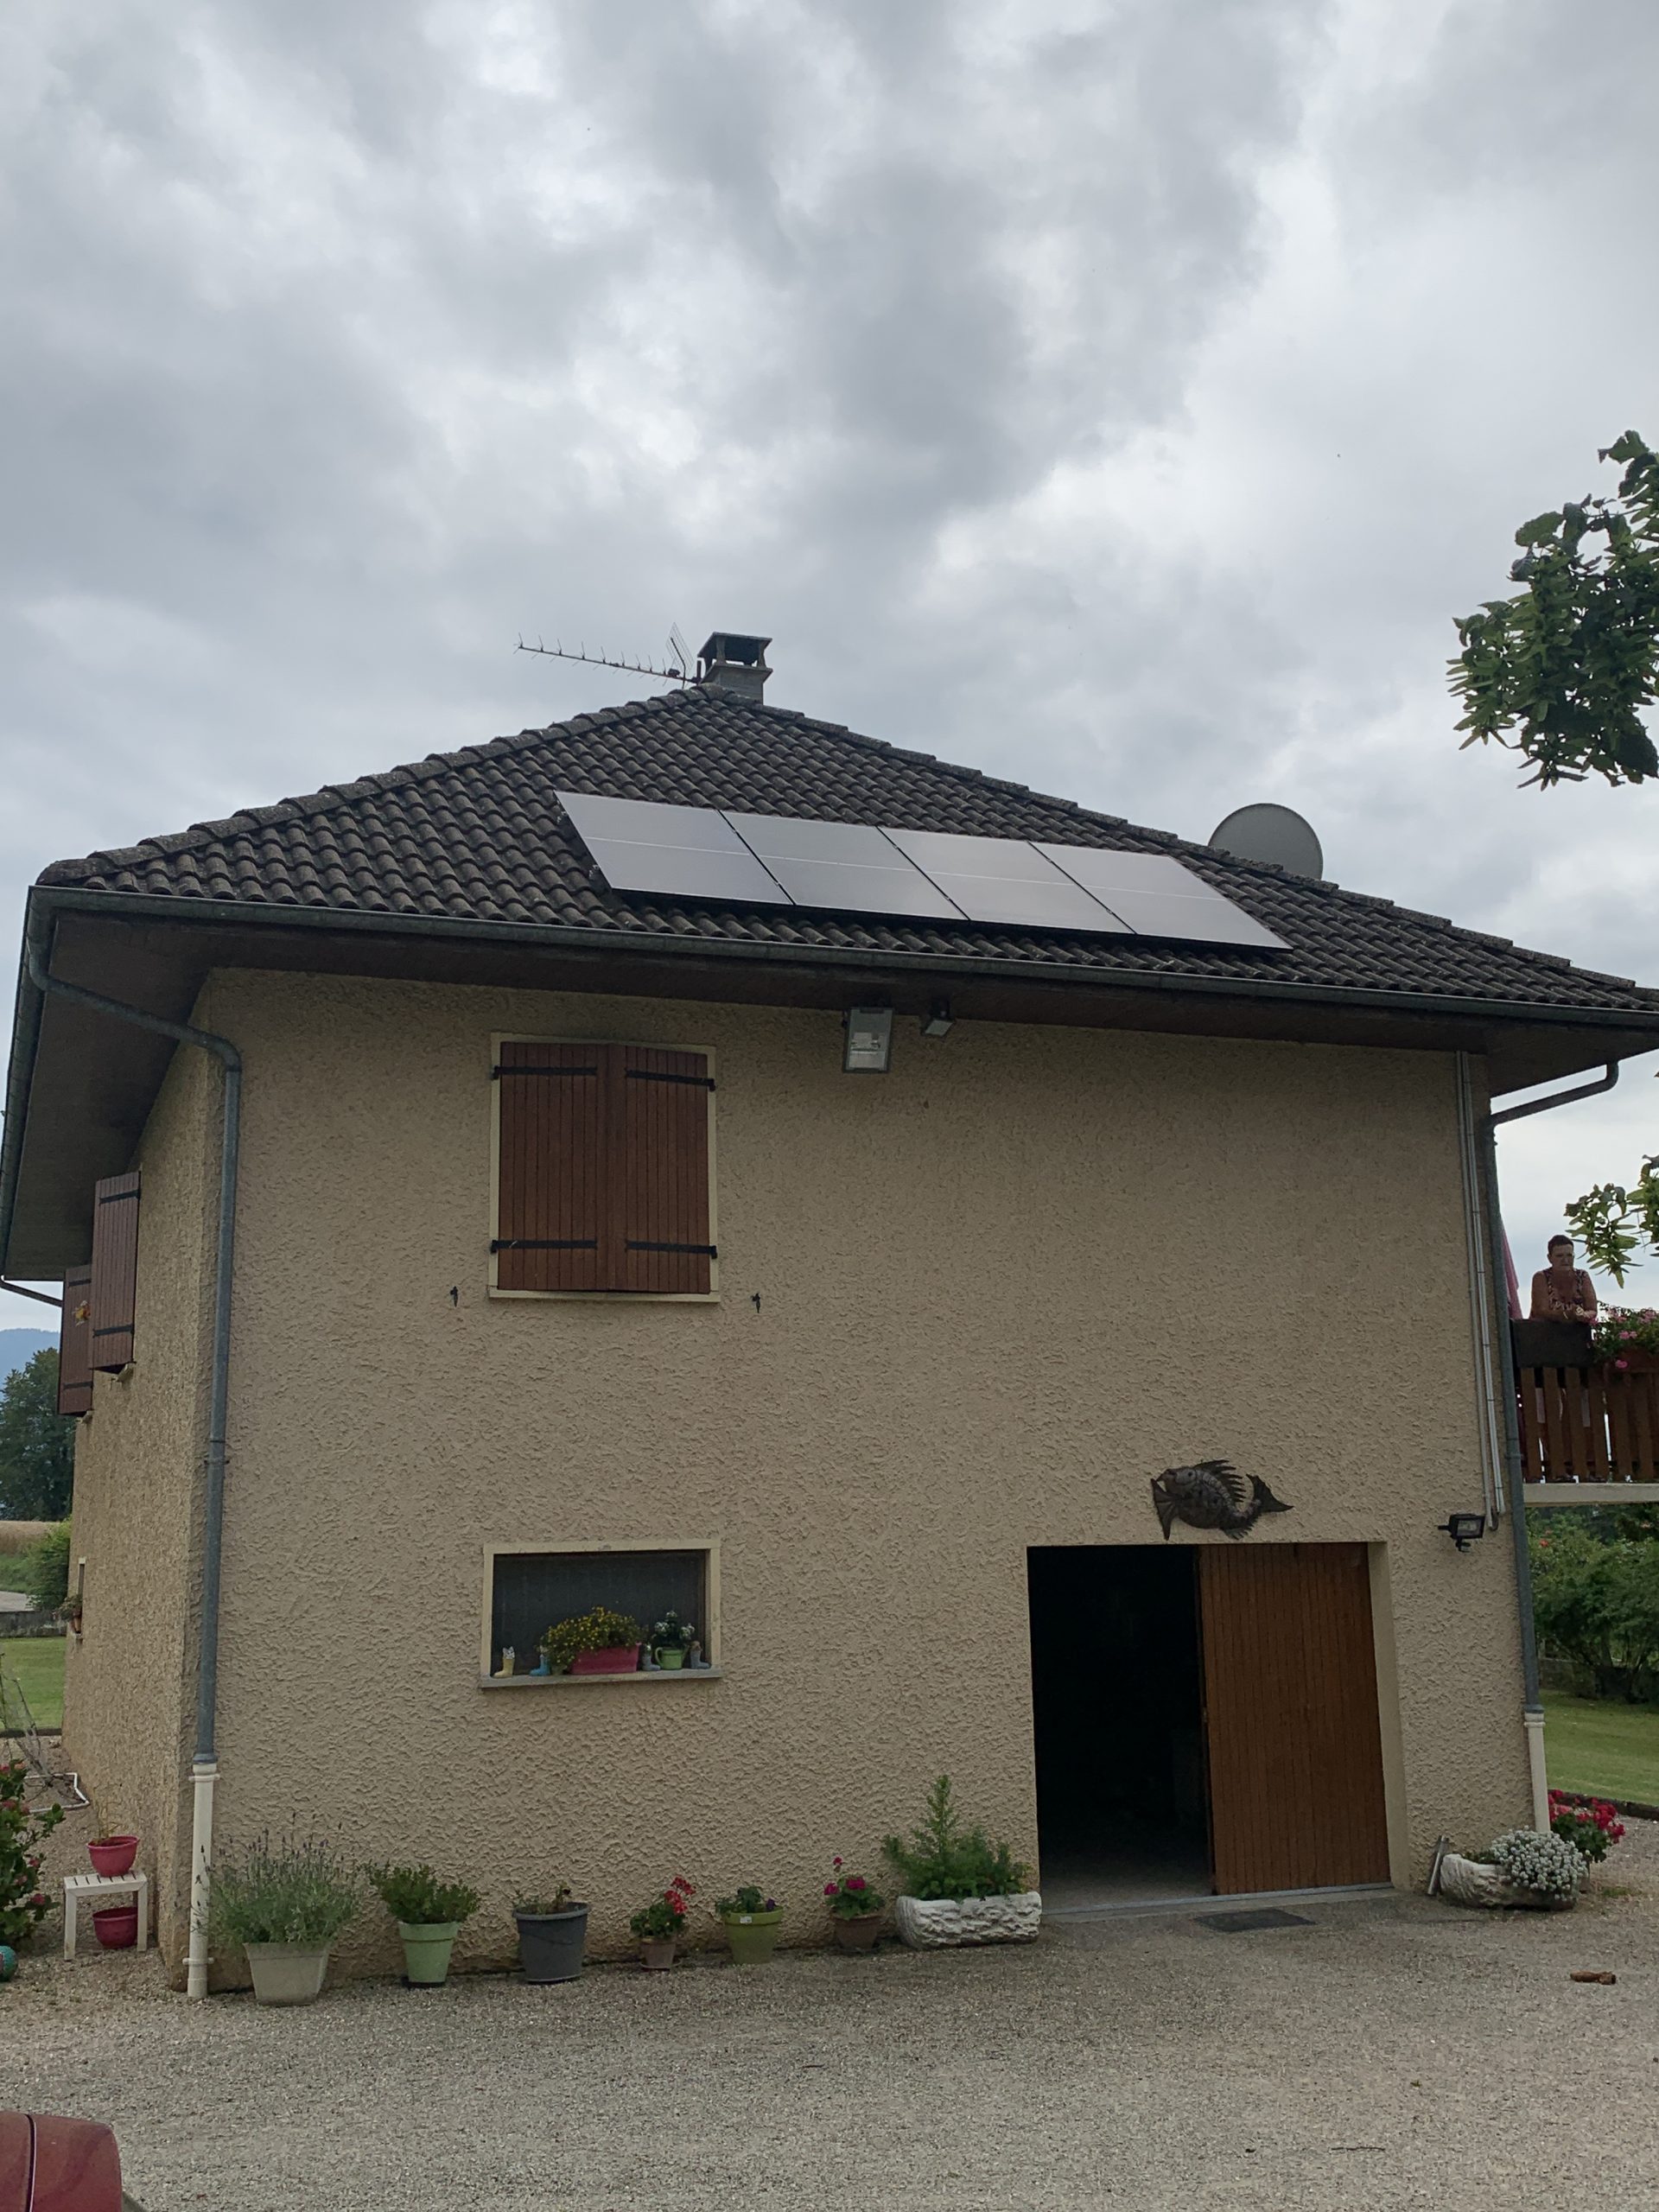 energies services france domessin savoie installation solaire photovoltaique autoconsommation